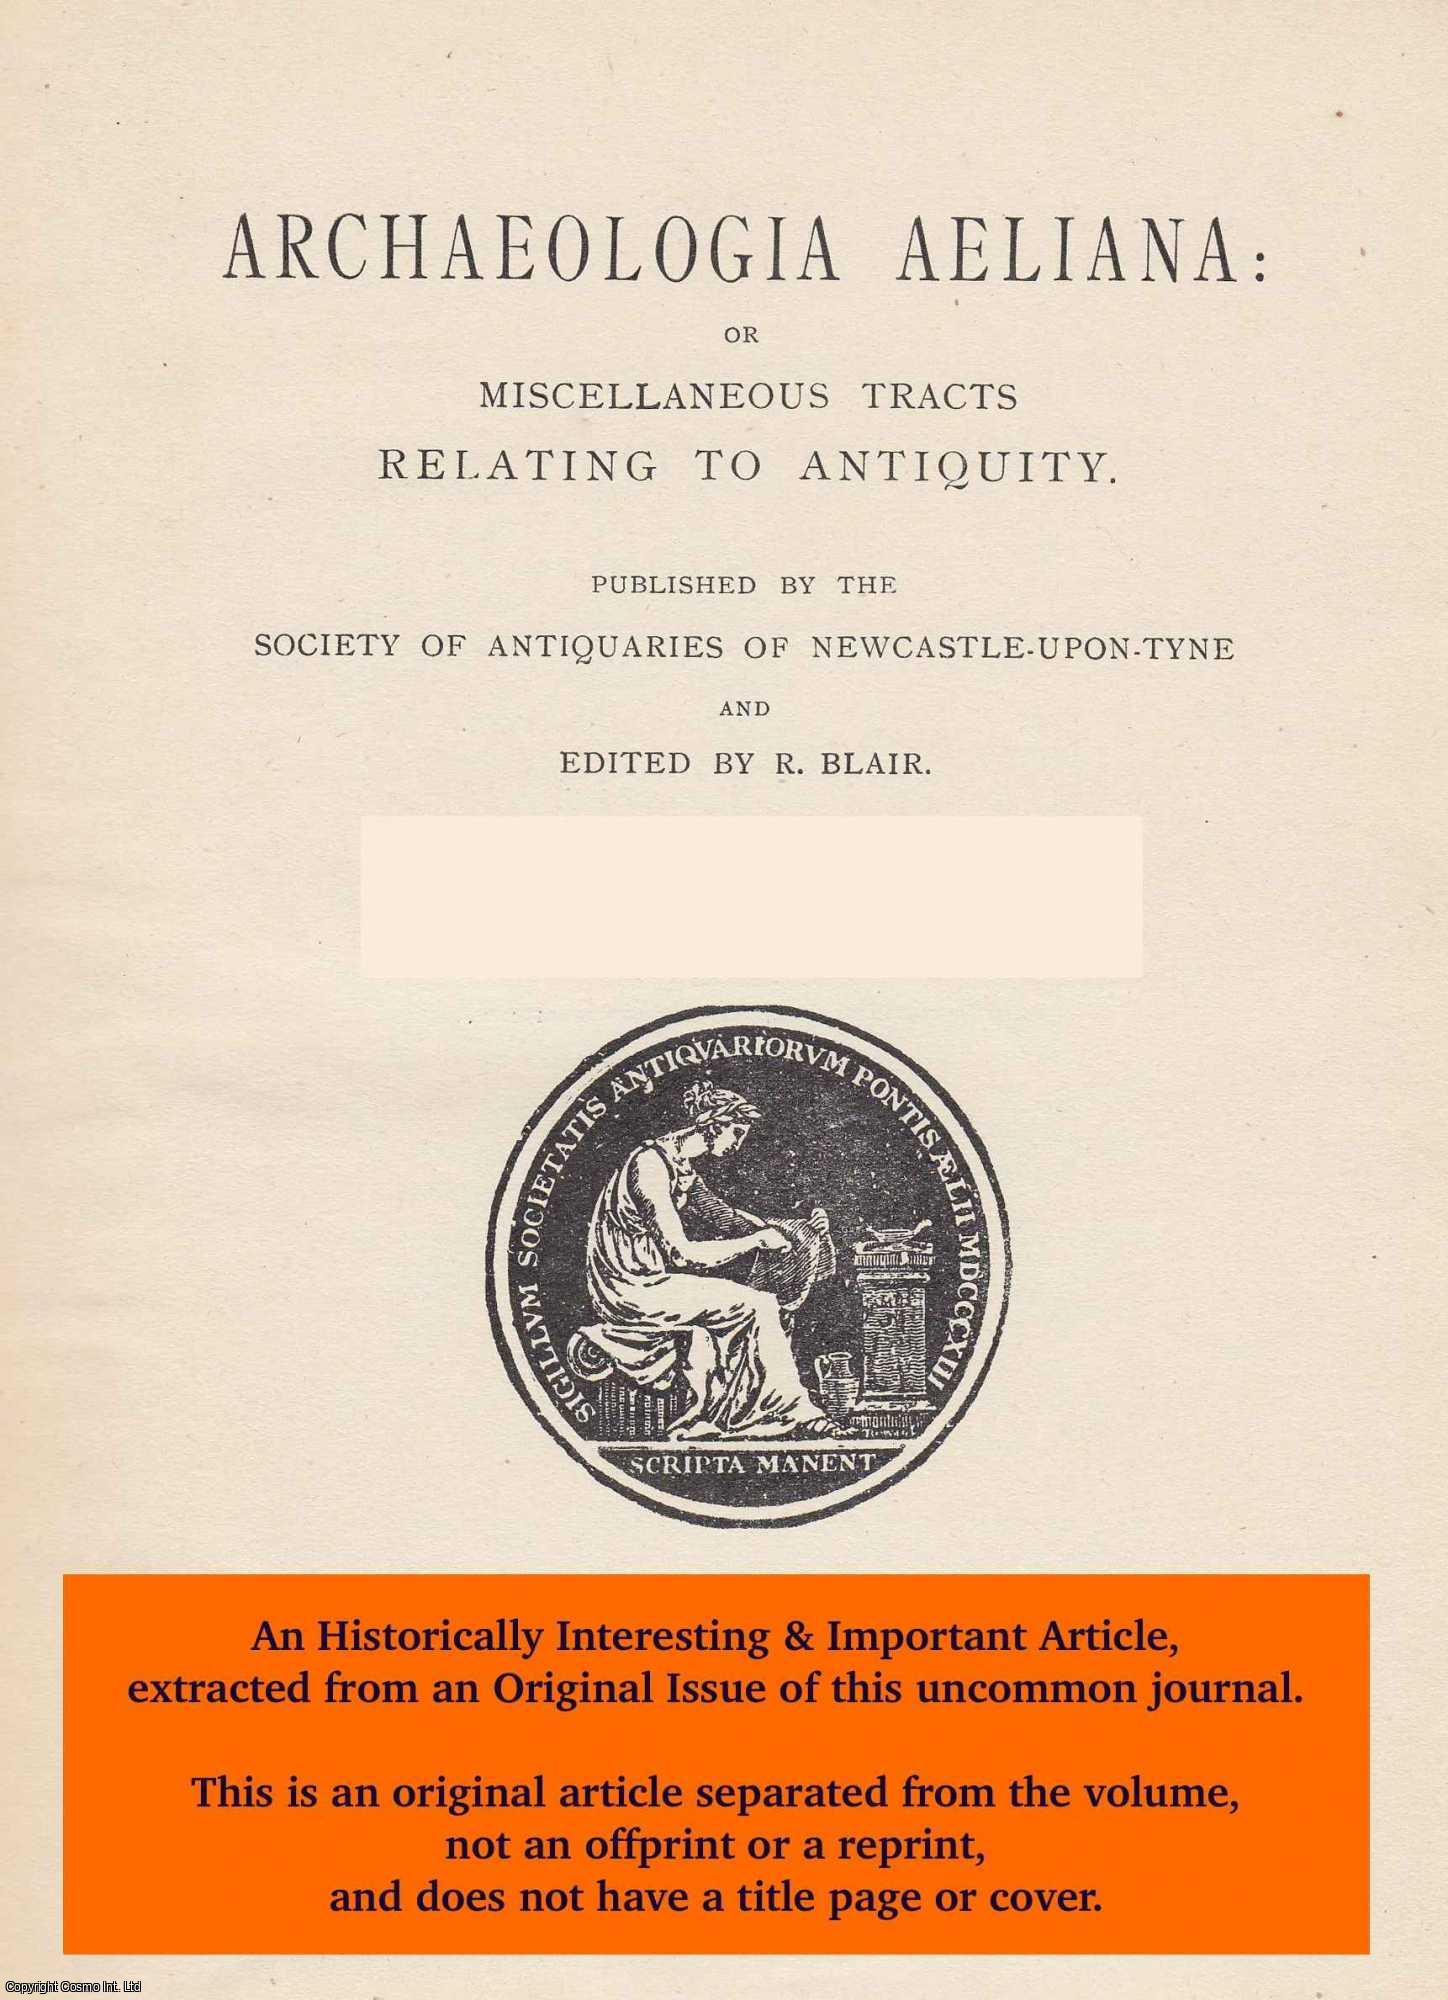 Forrest S. Scott, Forrest S. - Pre-Conquest Sculptures and The Common Seal of Hartlepool. An original article from The Archaeologia Aeliana: or Miscellaneous Tracts Relating to Antiquity, 1959.